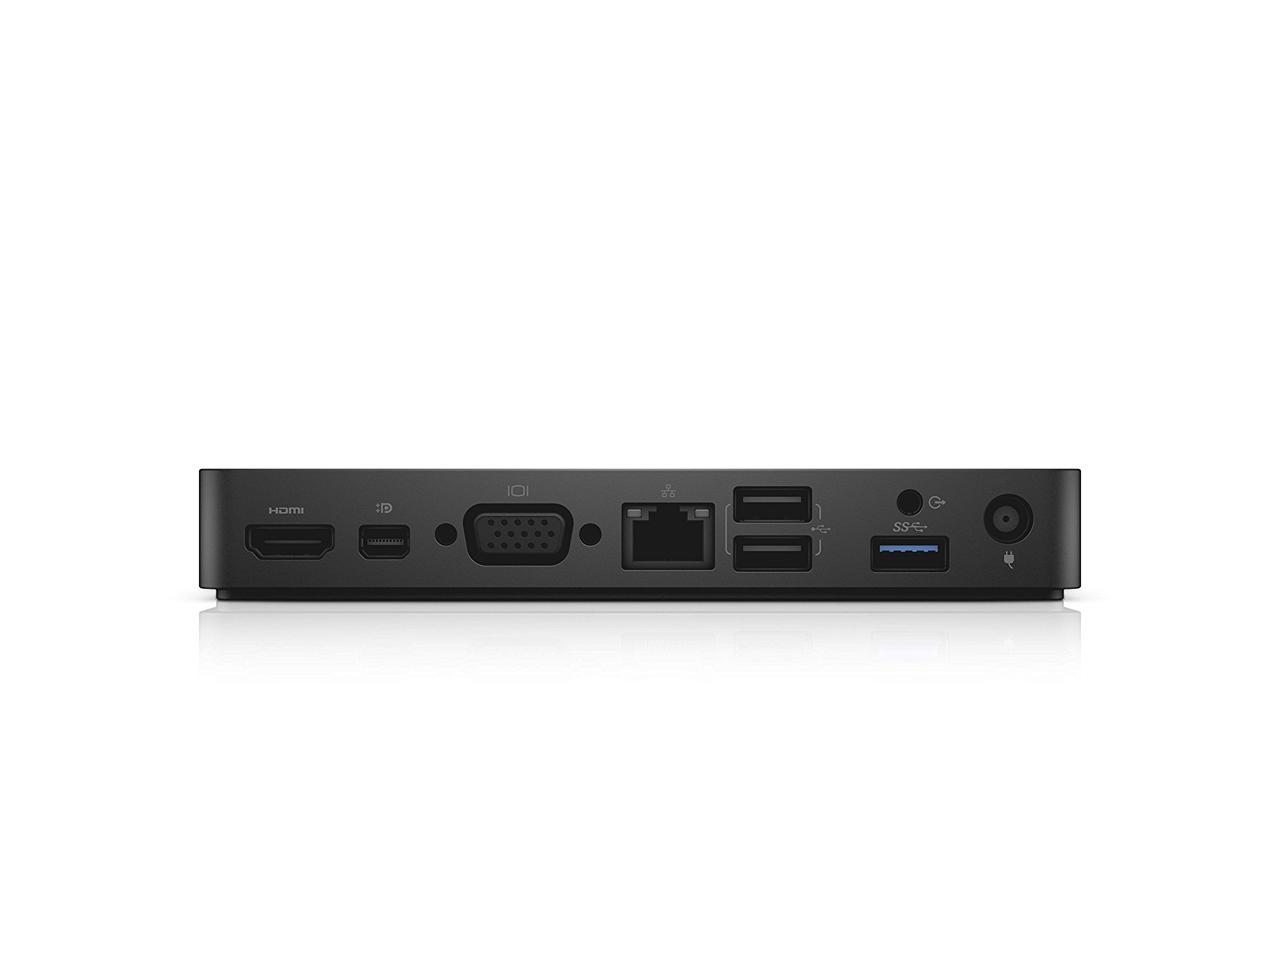 Dell-Imsourcing Dock - Wd15 With 180W Adapter